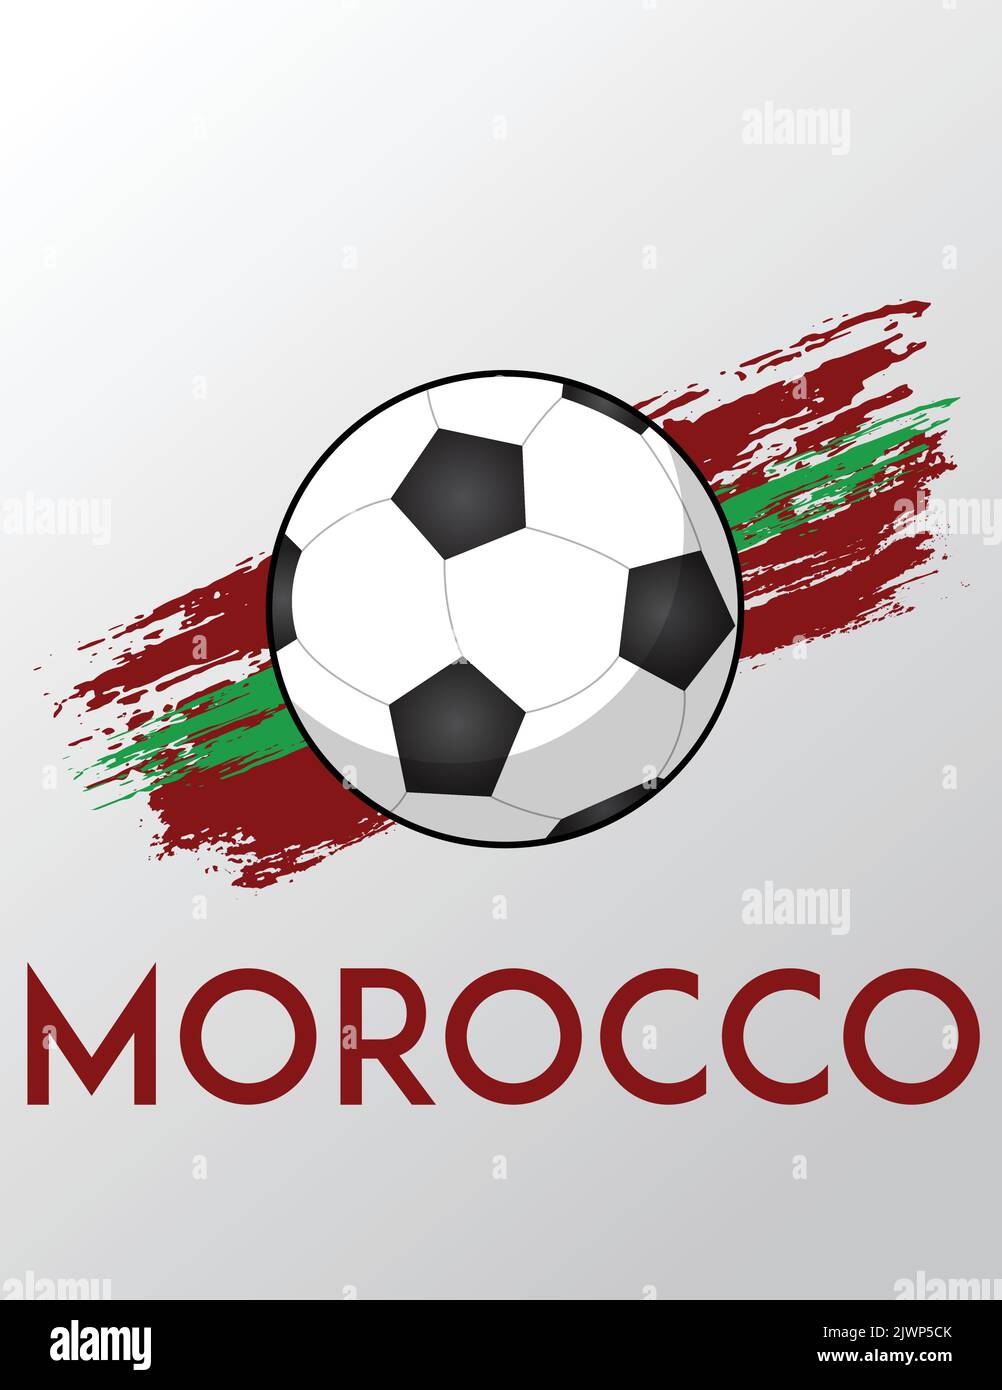 Morocco flag with Brush Effect for Soccer Theme Stock Vector